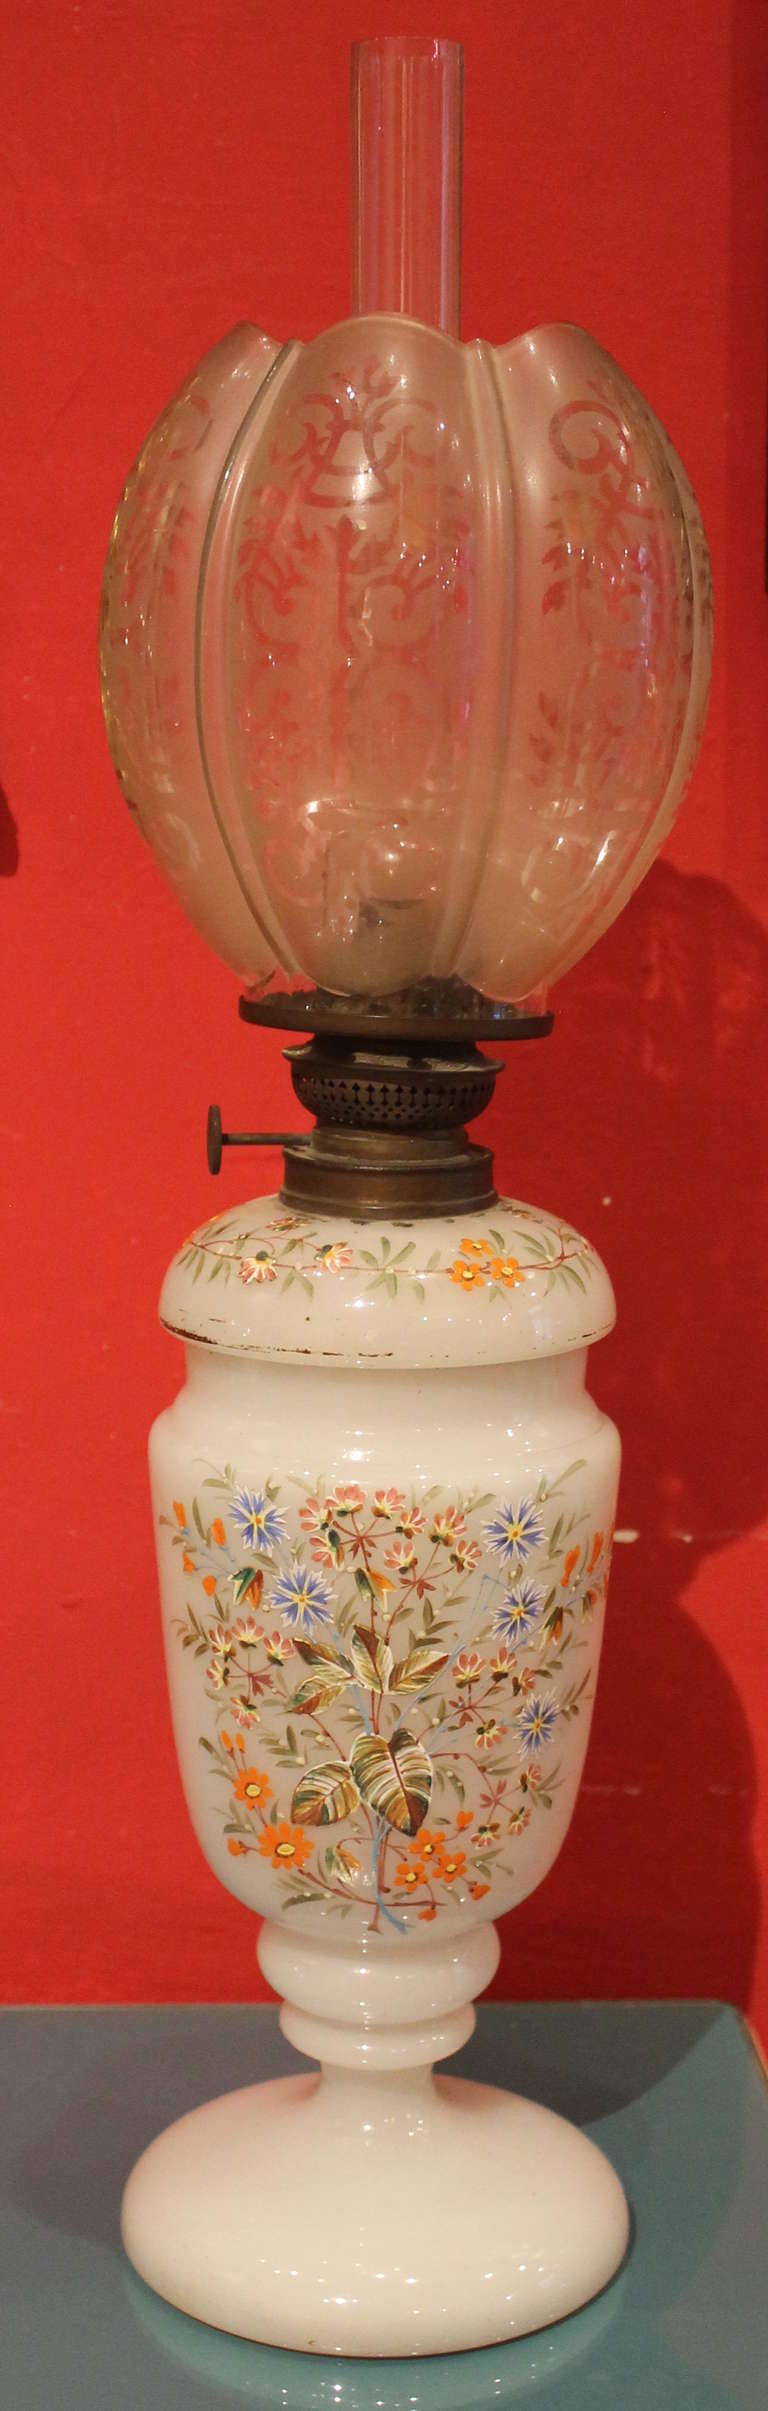 Early 20th century hand-painted glass oil lamps with original crystal shades.